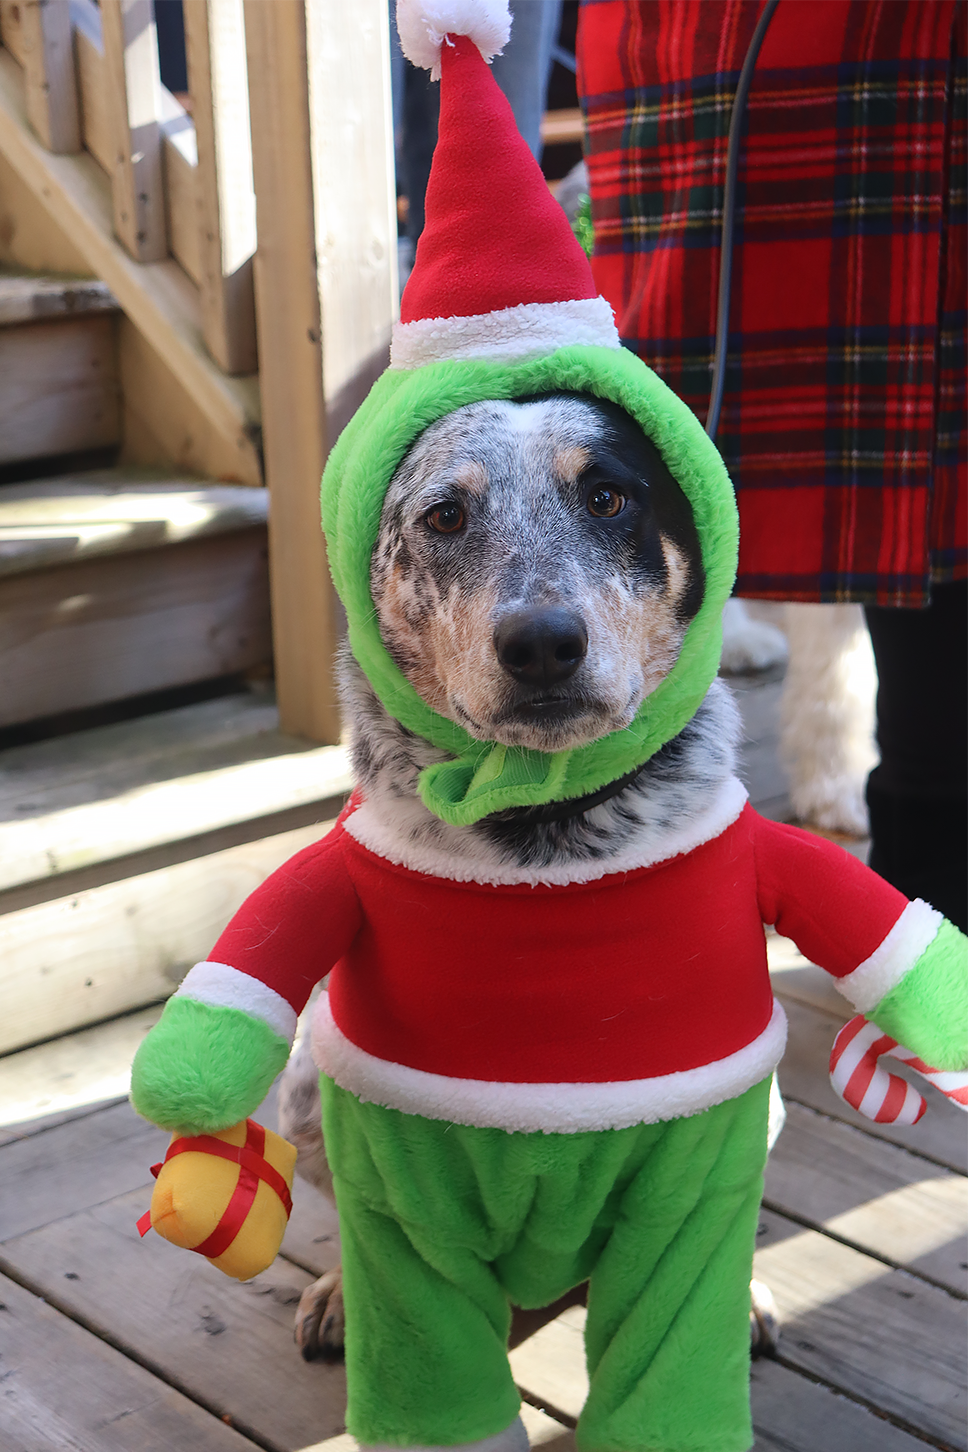 A Blue Heeler mutt dressed up in a Grinch costume with a Santa hat.